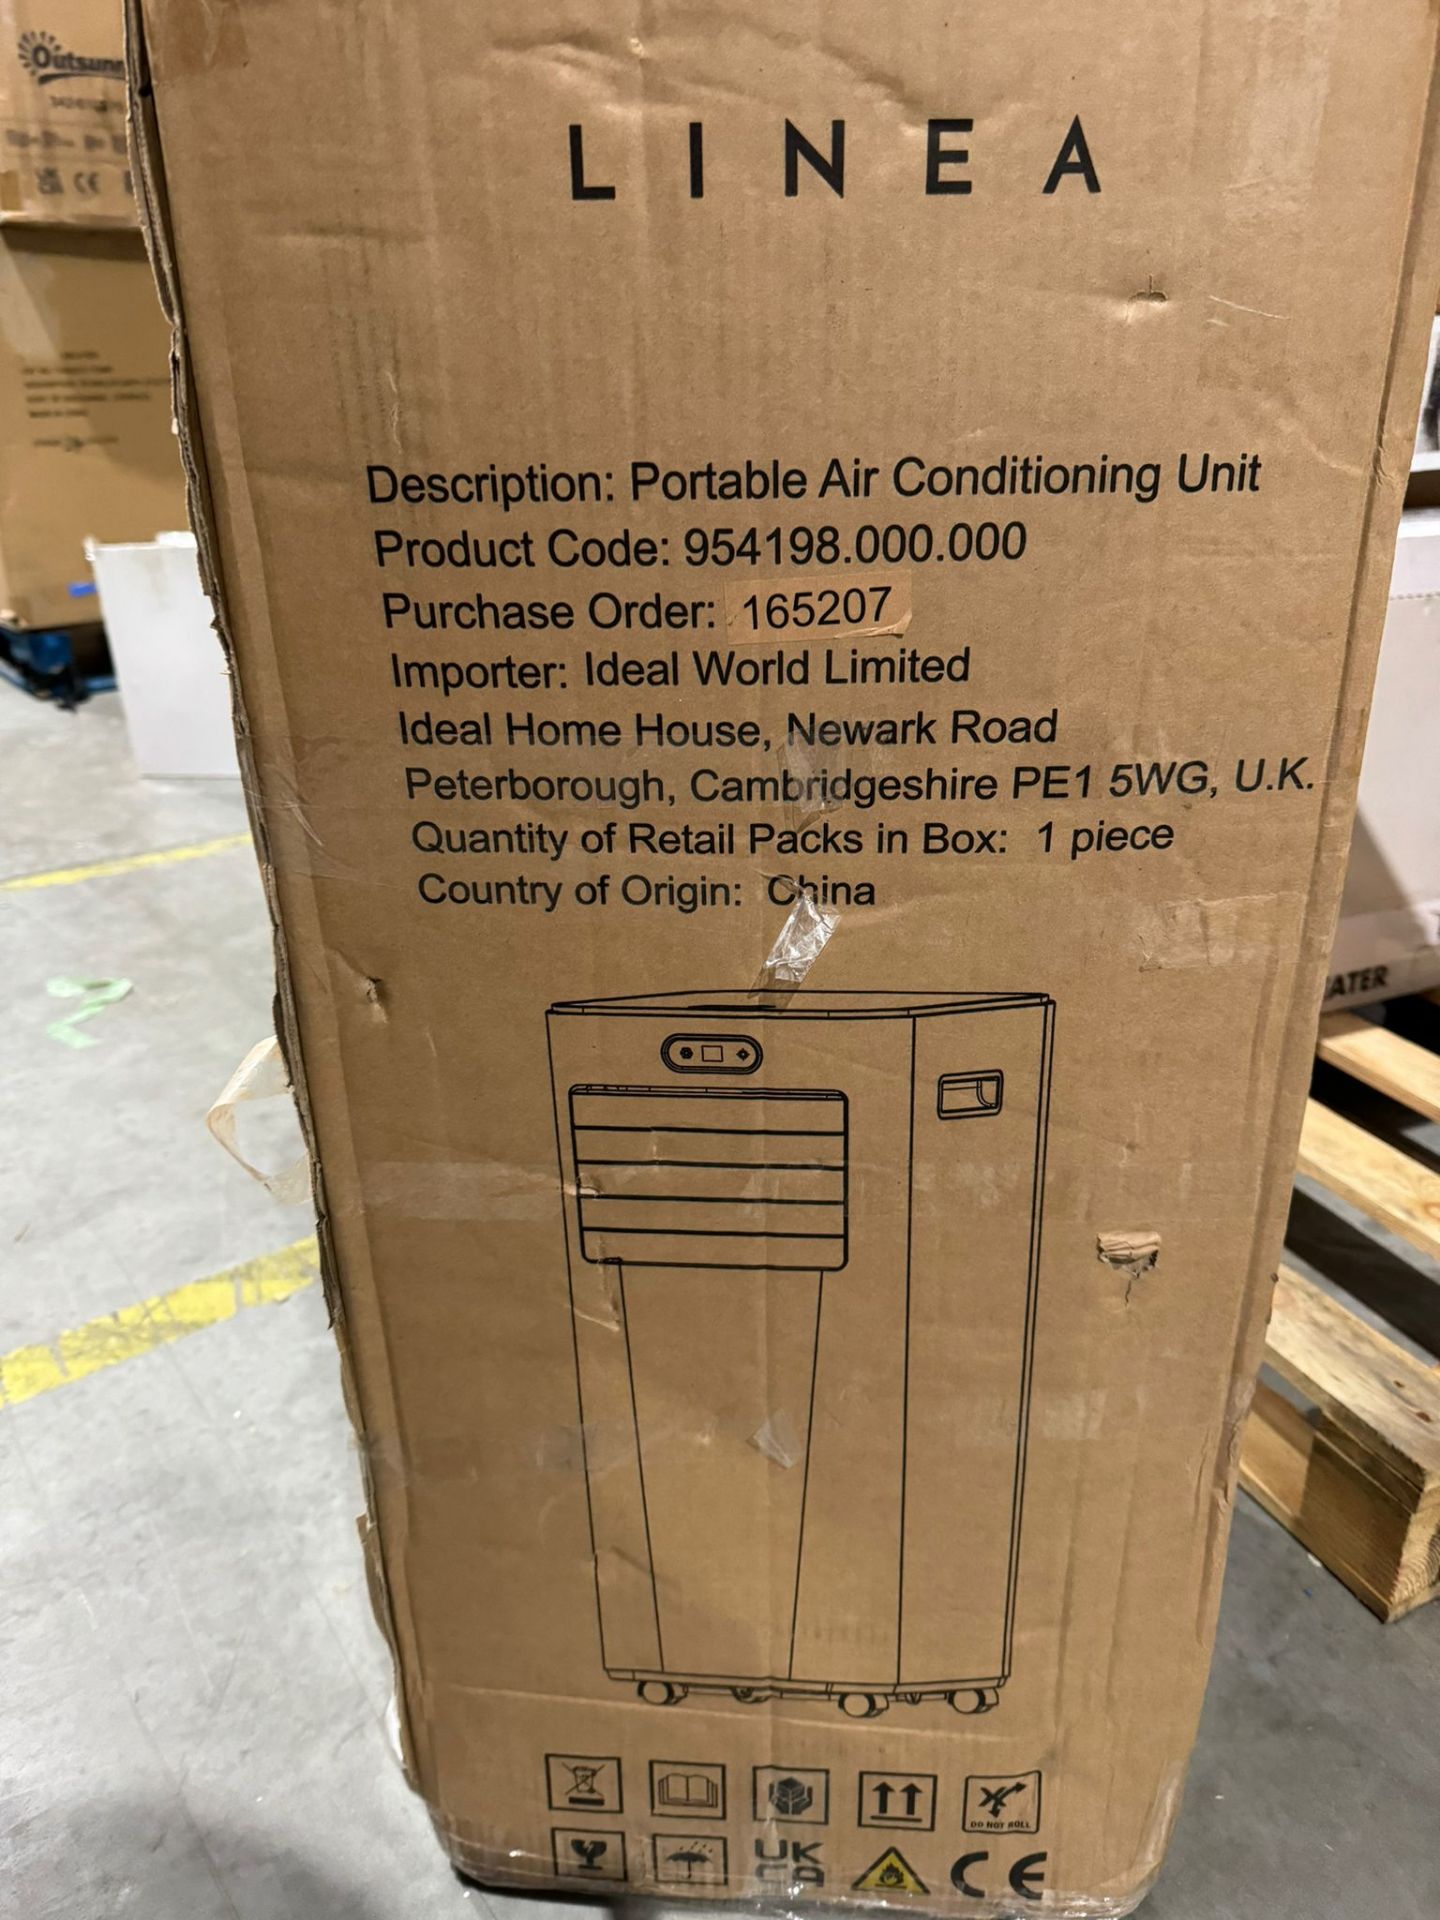 1 x LINEA Portable Air Conditioning Unit - 954198.000.000 with Window Kit - NO RESERVE - Image 8 of 8